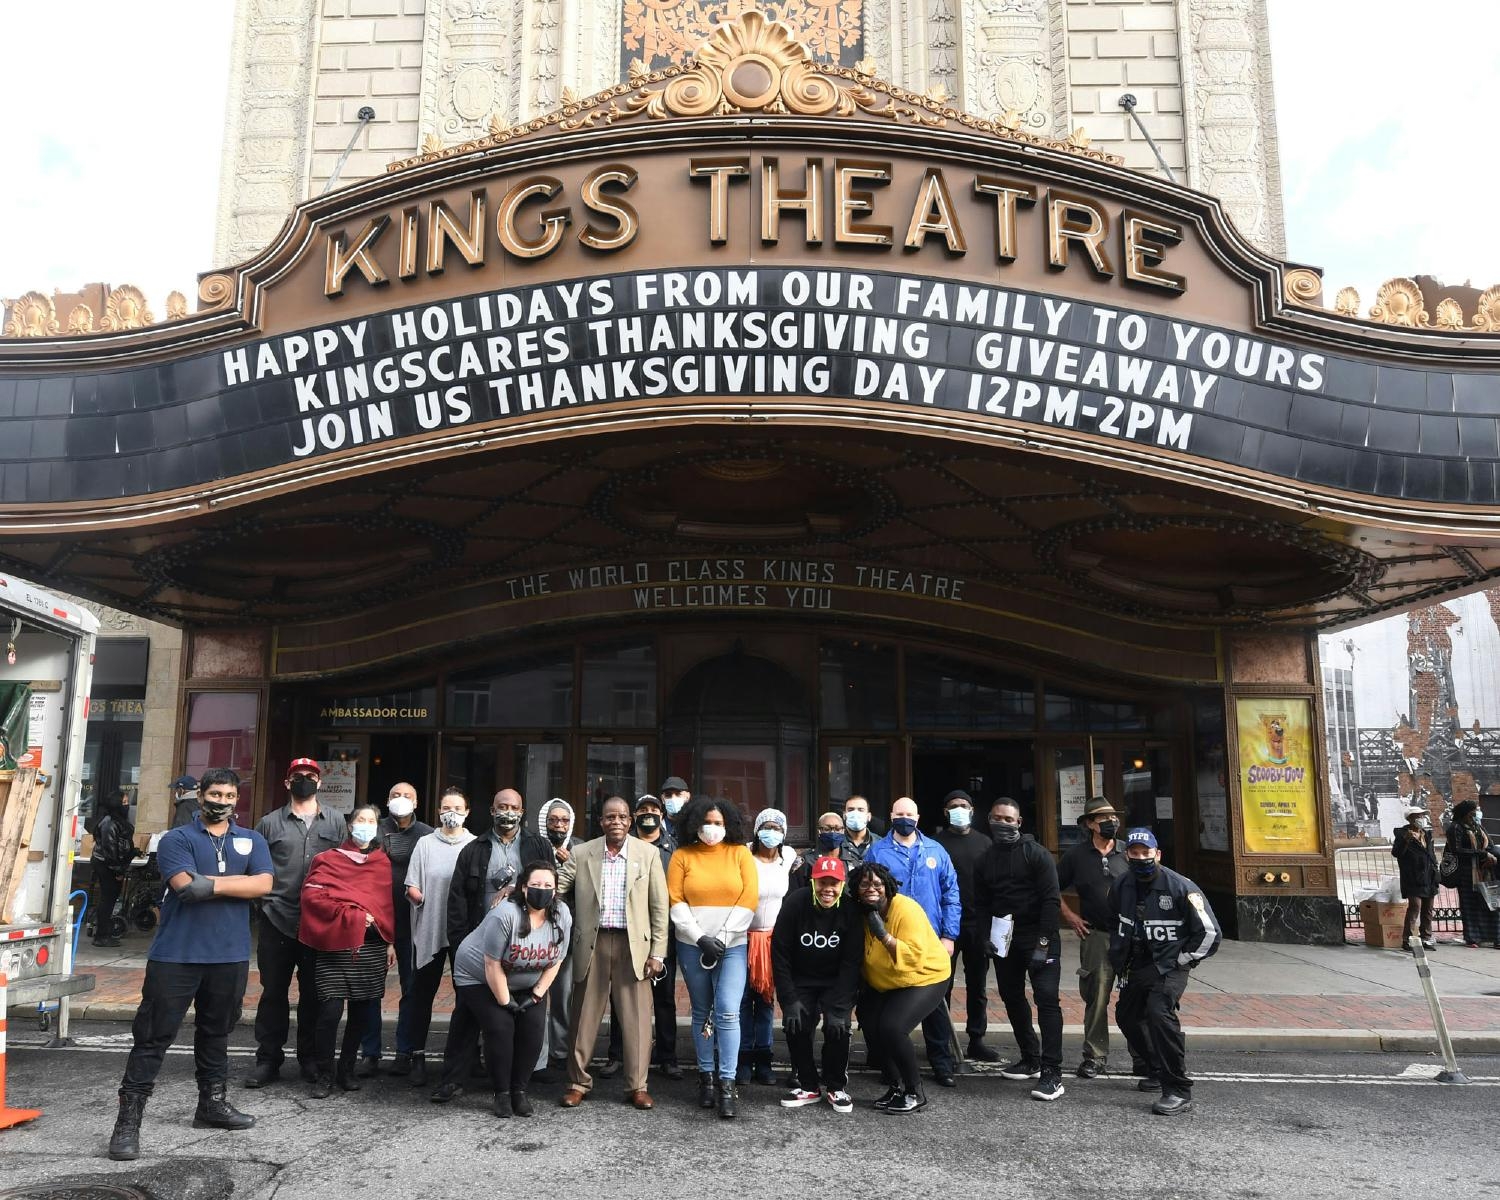 One ATG venue, the Kings Theatre, offers The Kings Cares Thanksgiving Luncheon which provides 450+ hot plates to locals.